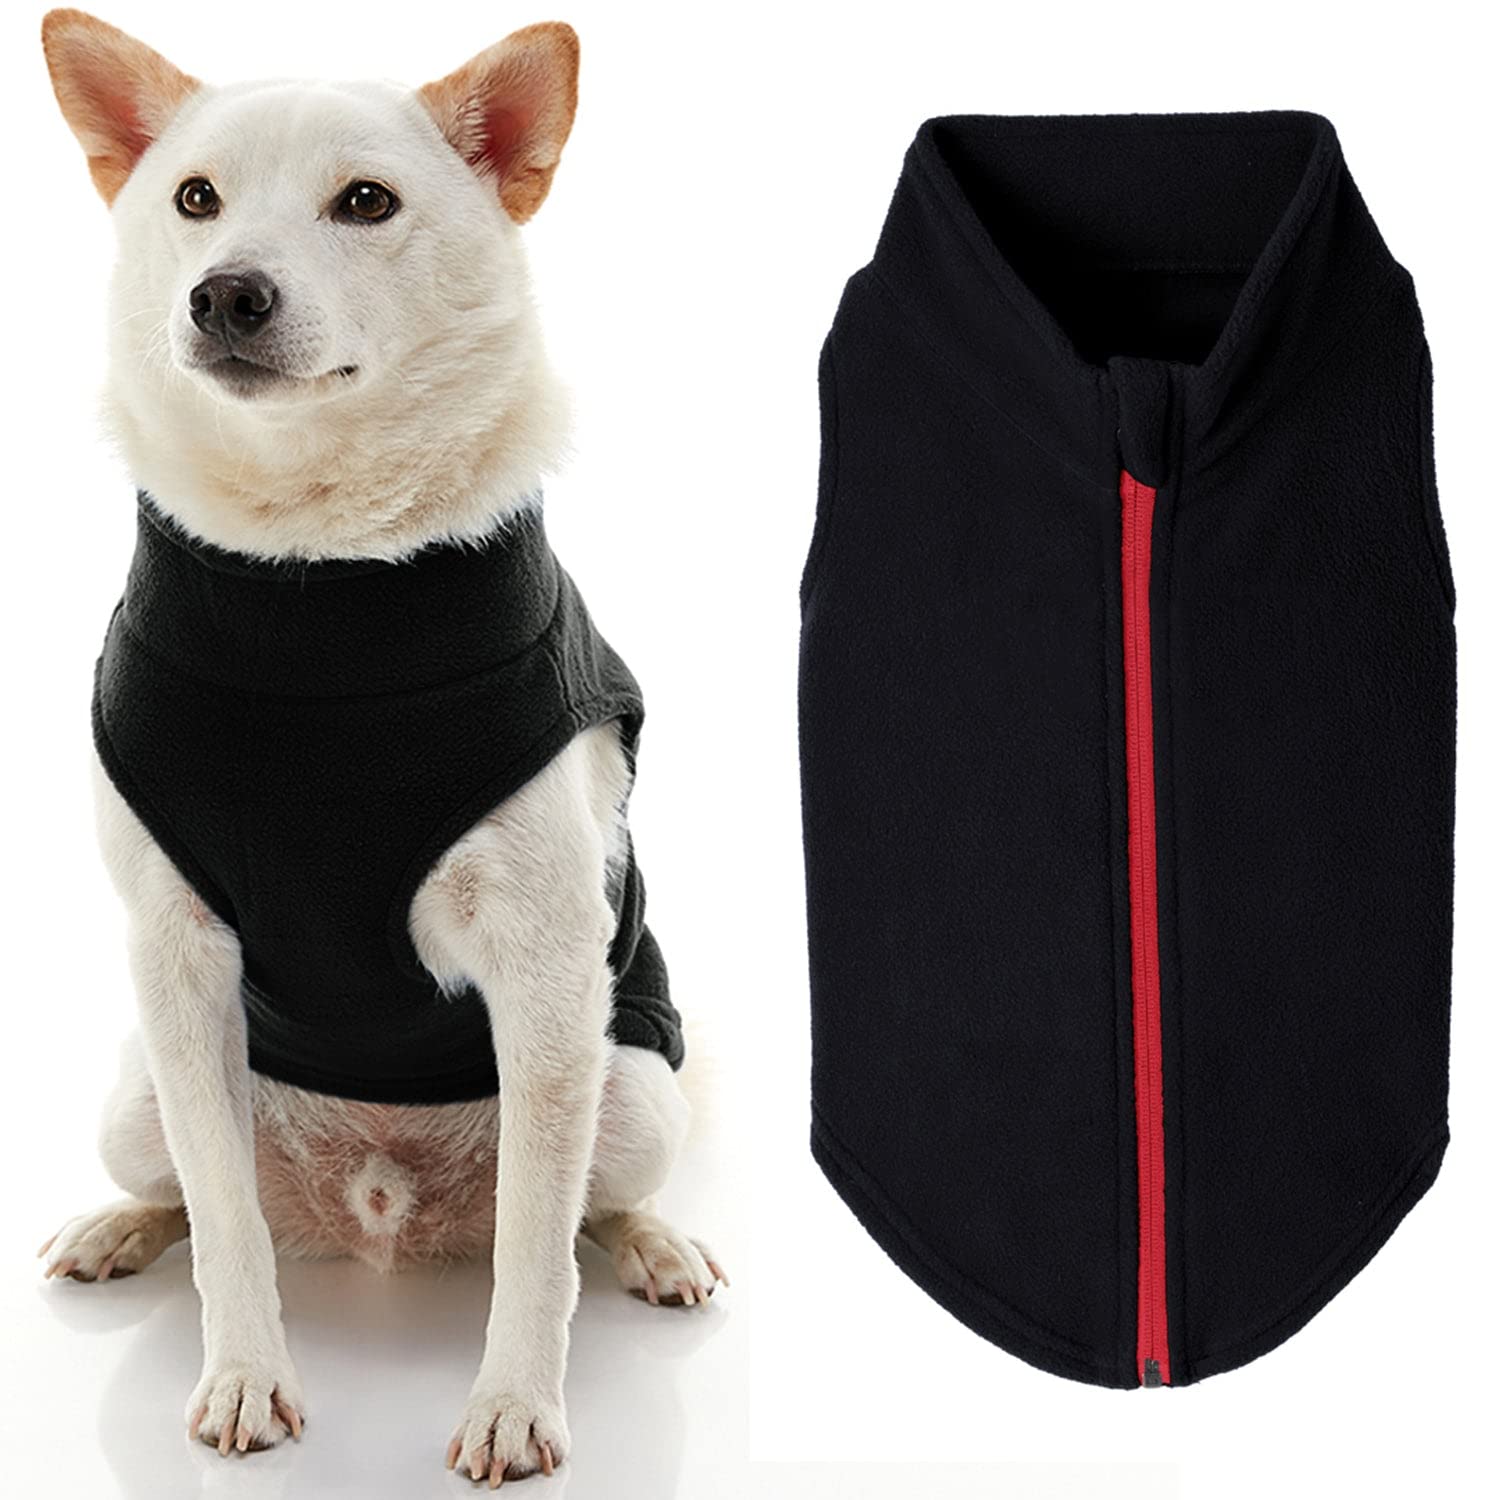 gooby Zip Up Fleece Dog Sweater - Black, 3X-Large - Warm Pullover Fleece Step-in Dog Jacket with Dual D Ring Leash - Winter Smal